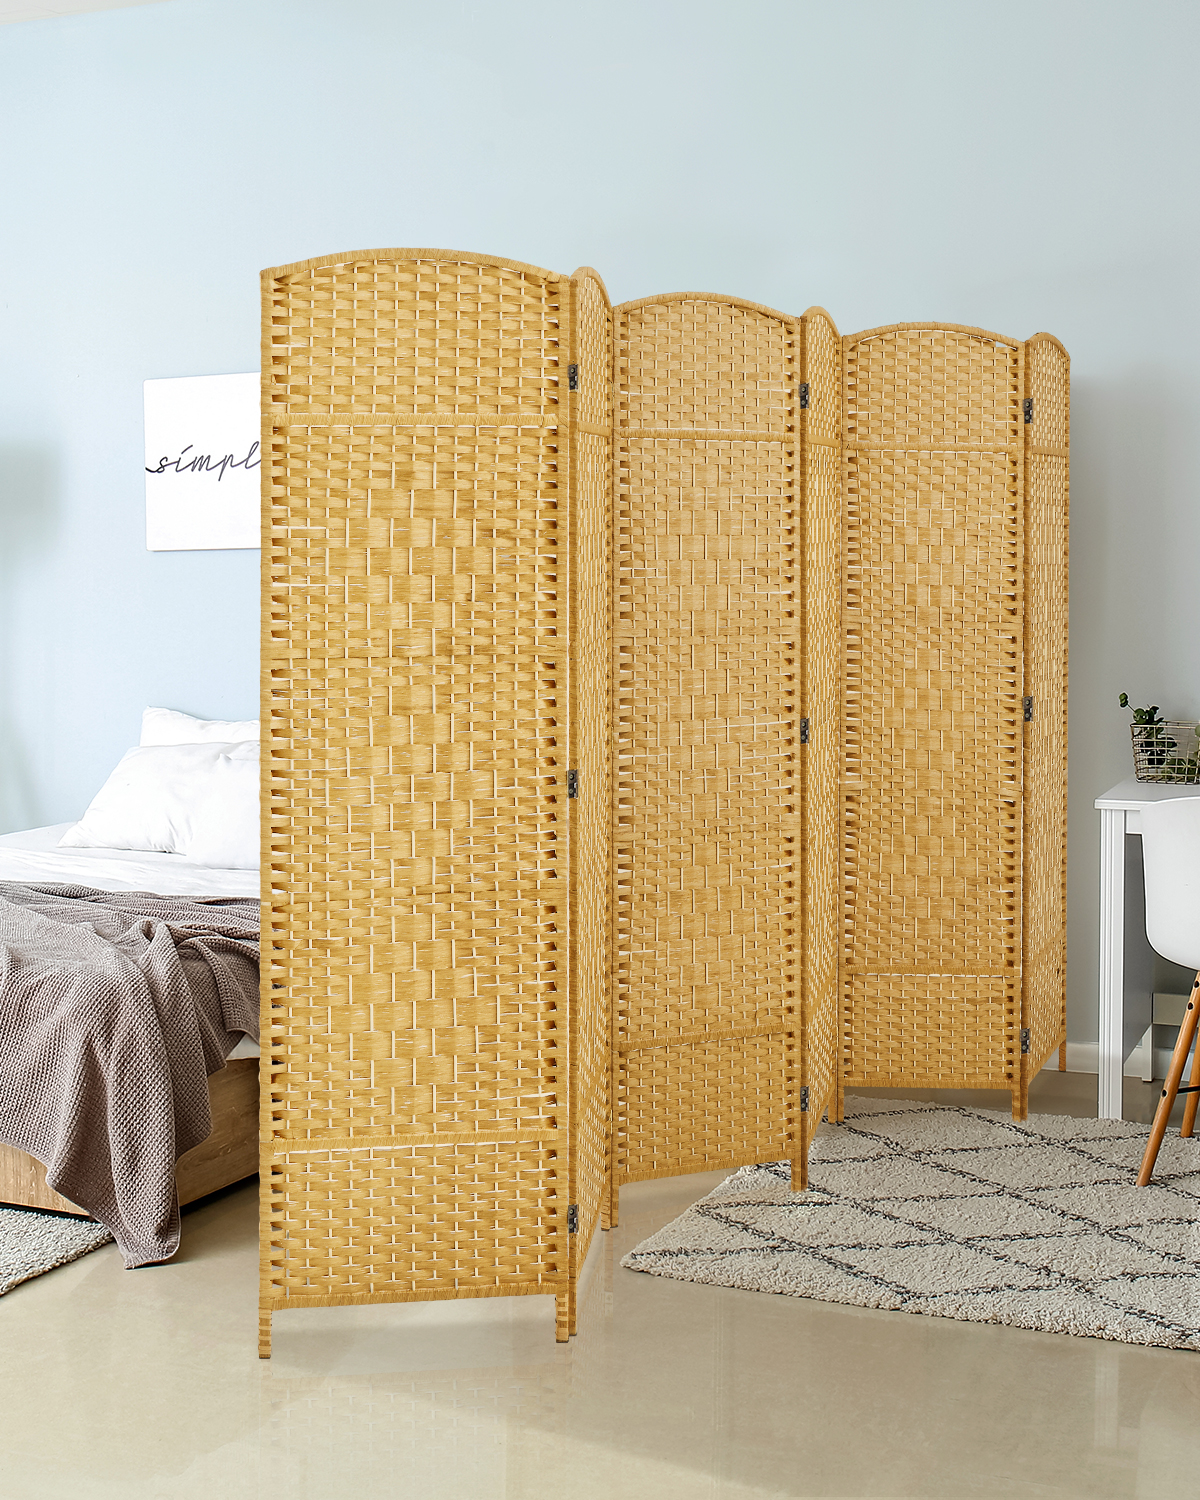 Jostyle Room Divider 6ft. Tall Extra Wide Privacy Screen, Folding Privacy Screens - image 4 of 12